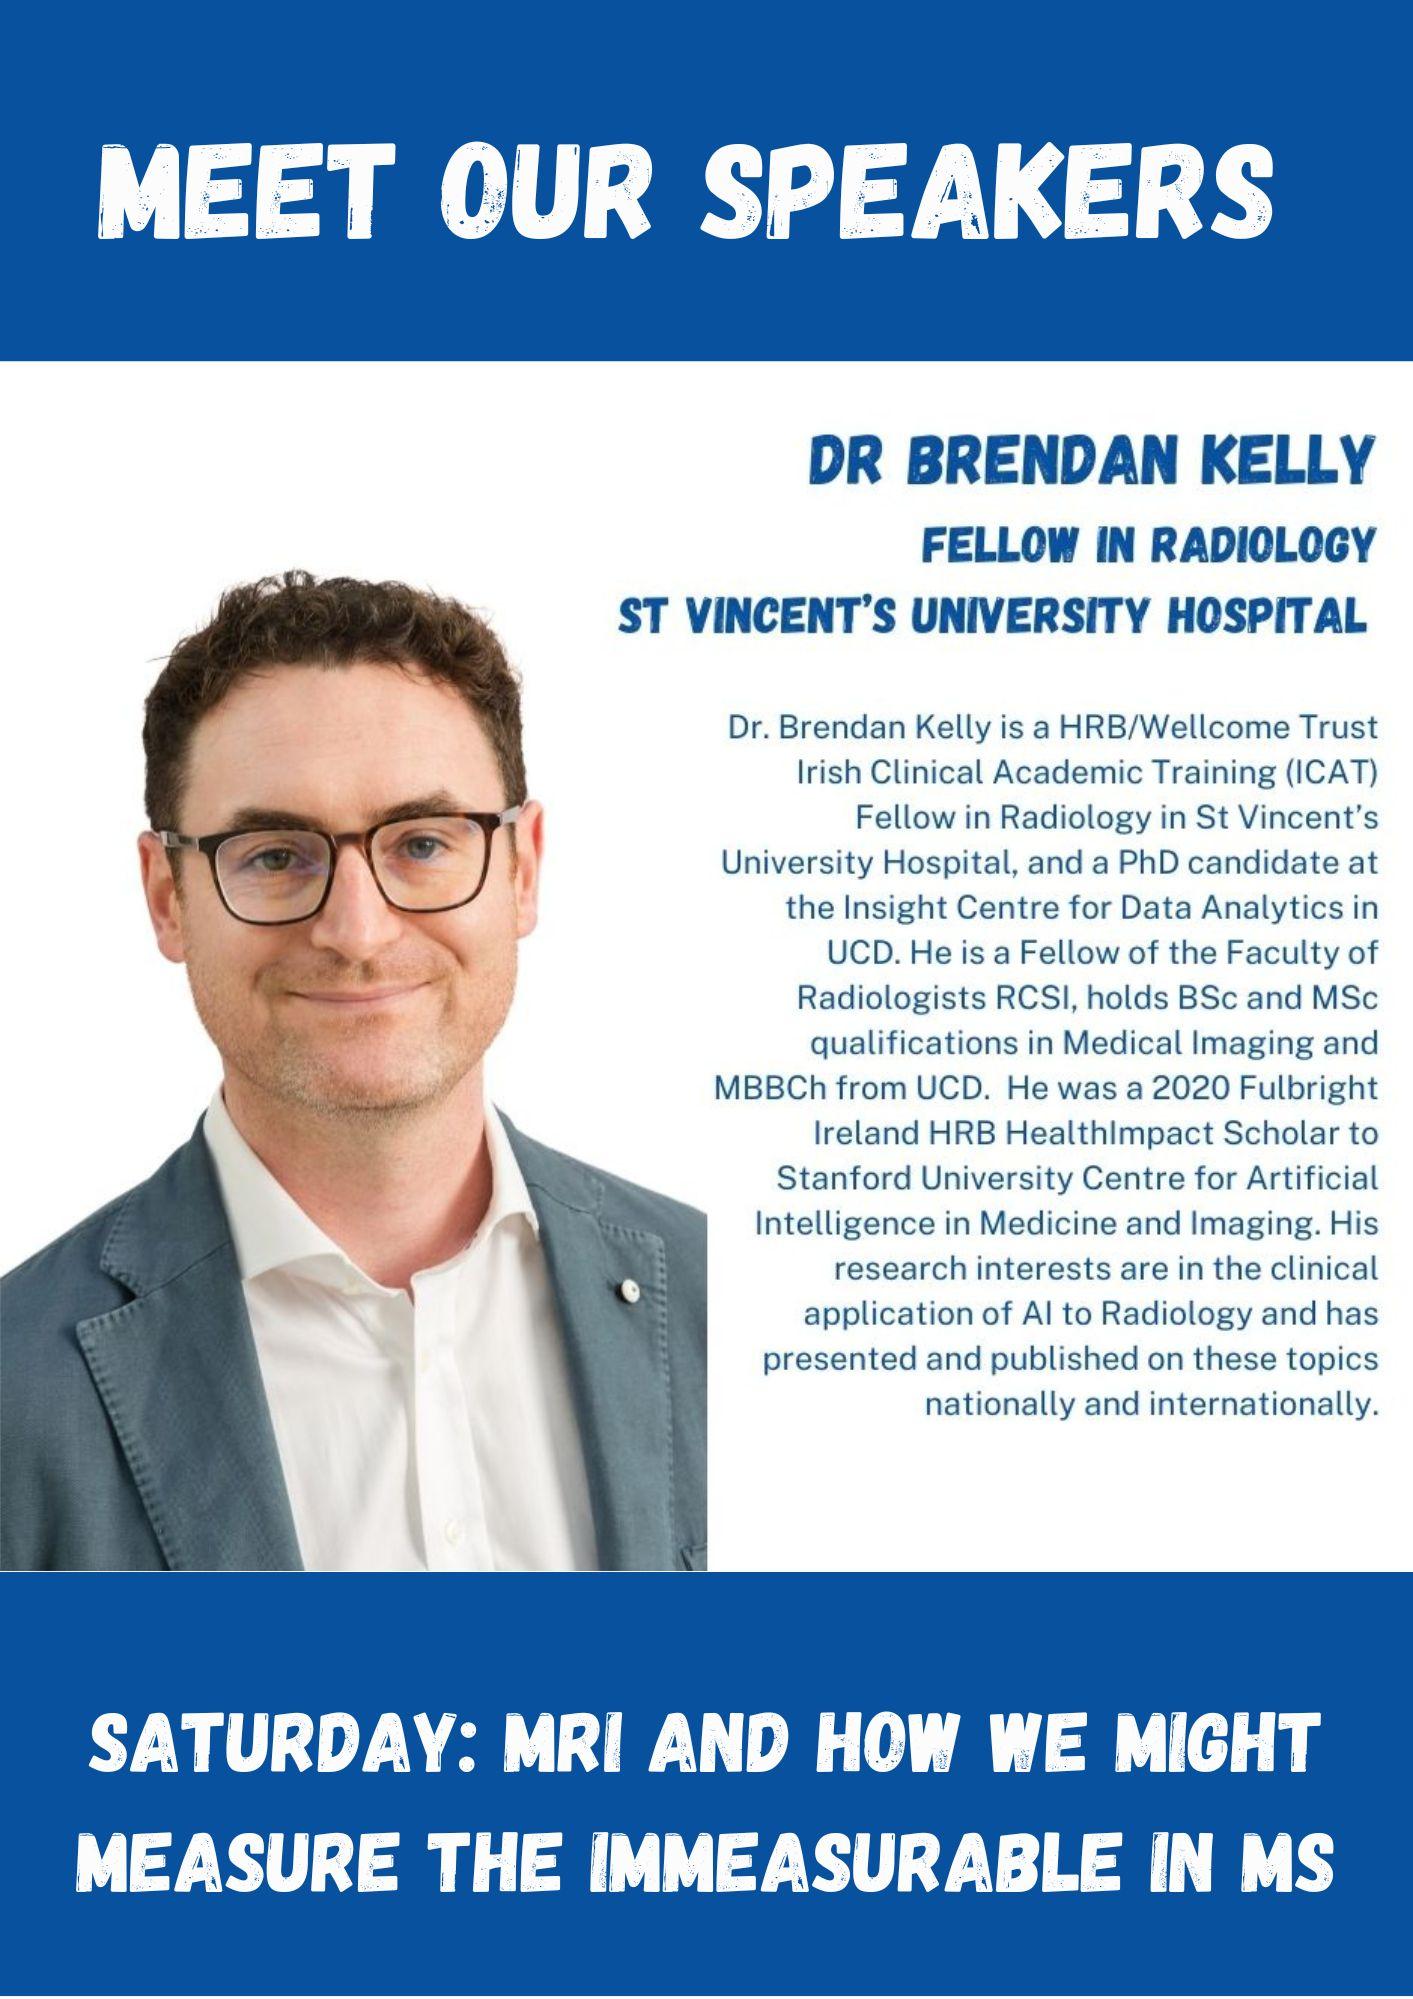 Image of Brendan Kelly with blue text on white background